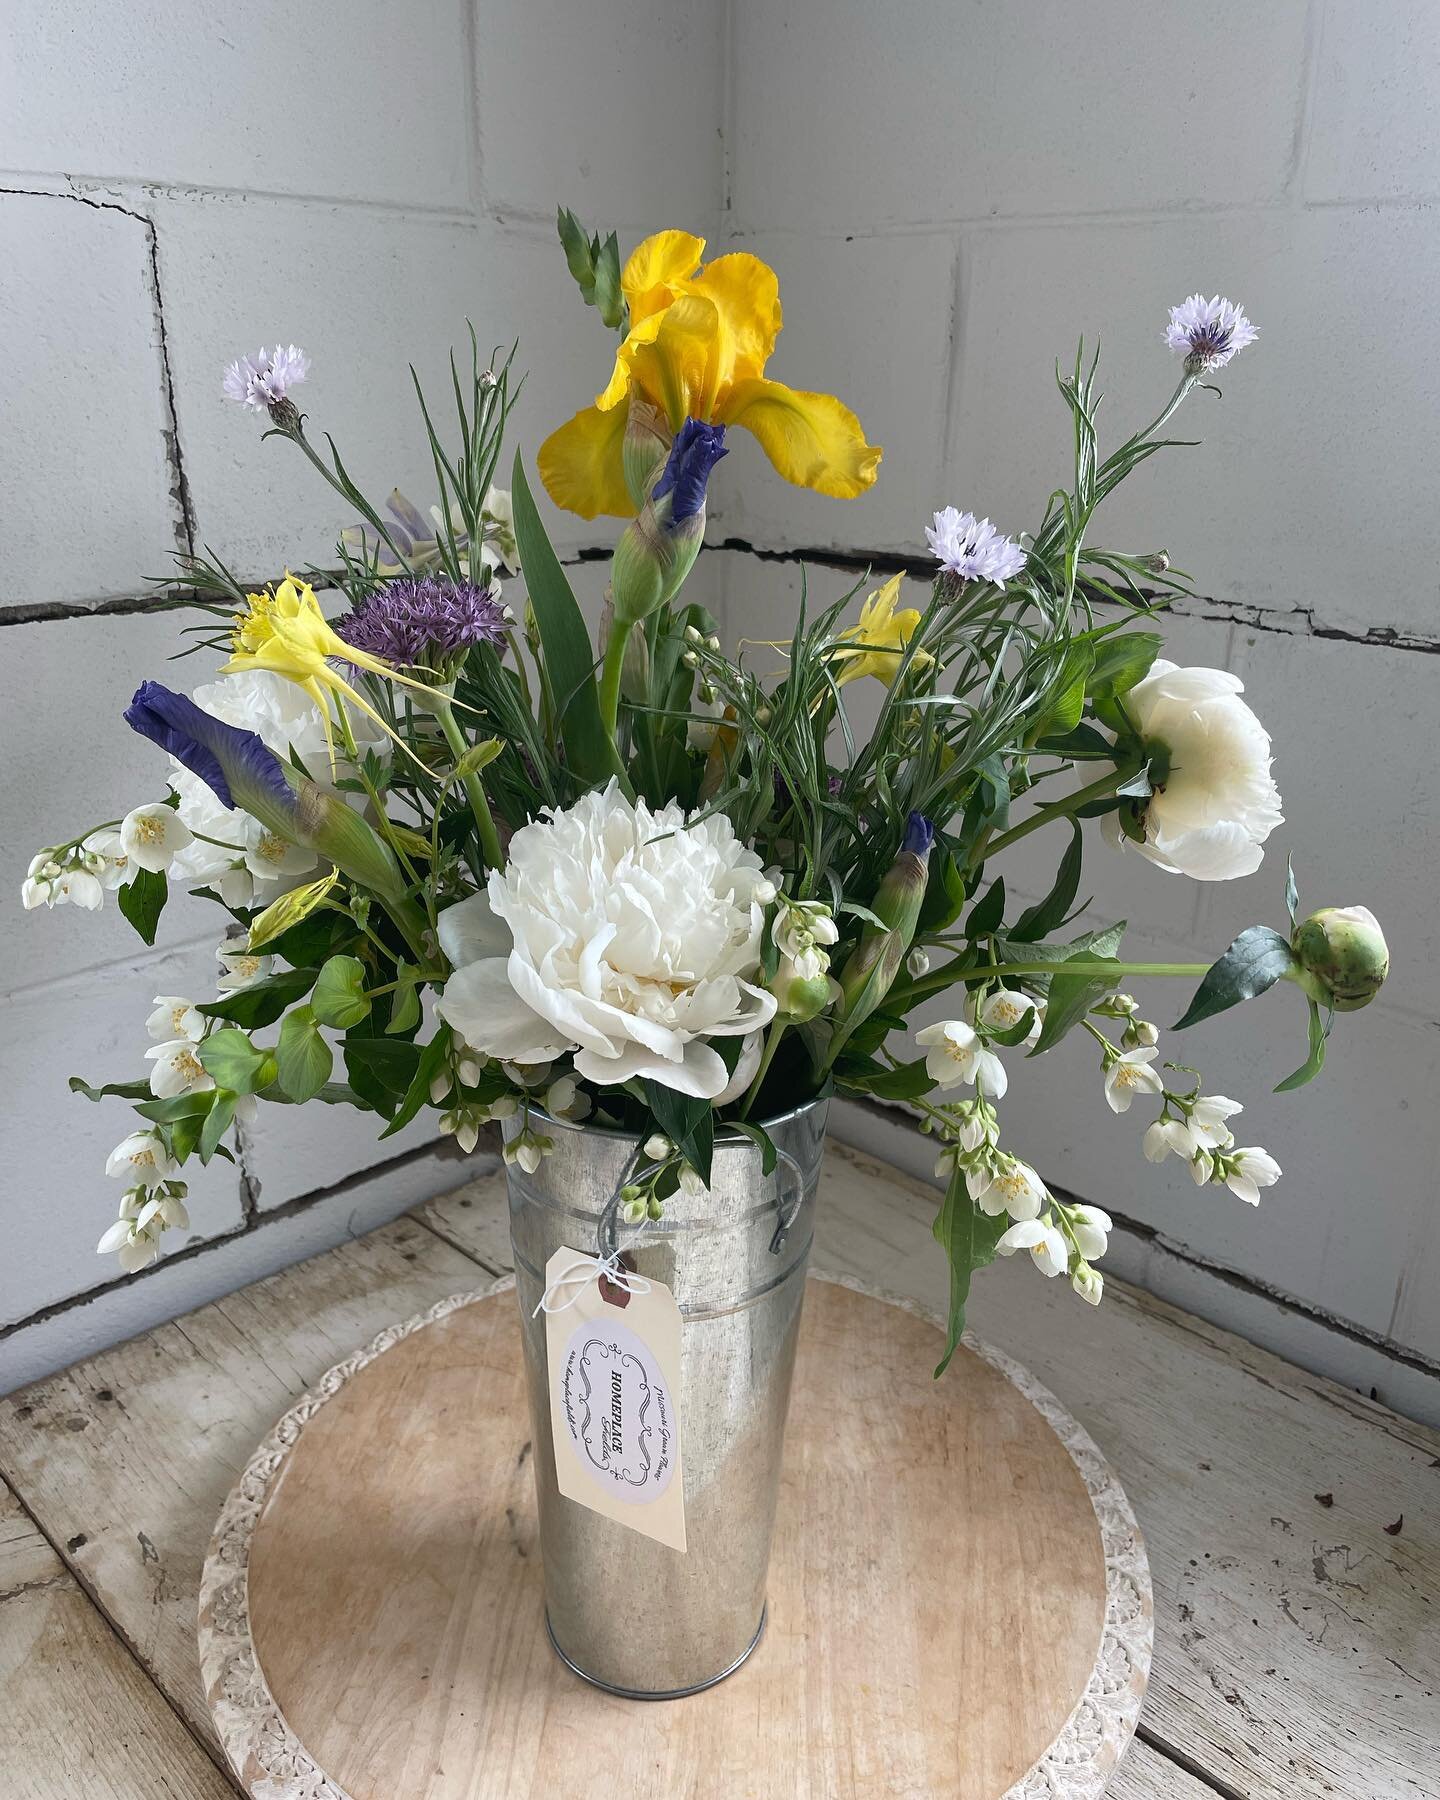 Loving the combination of flowers we have right now. Field to vase friends! The photos of this yellow iris just do not do it justice. It&rsquo;s shimmering&hellip; #iris #peony #blooms #flowerfarm #farmerflorist #missourigrownflowers